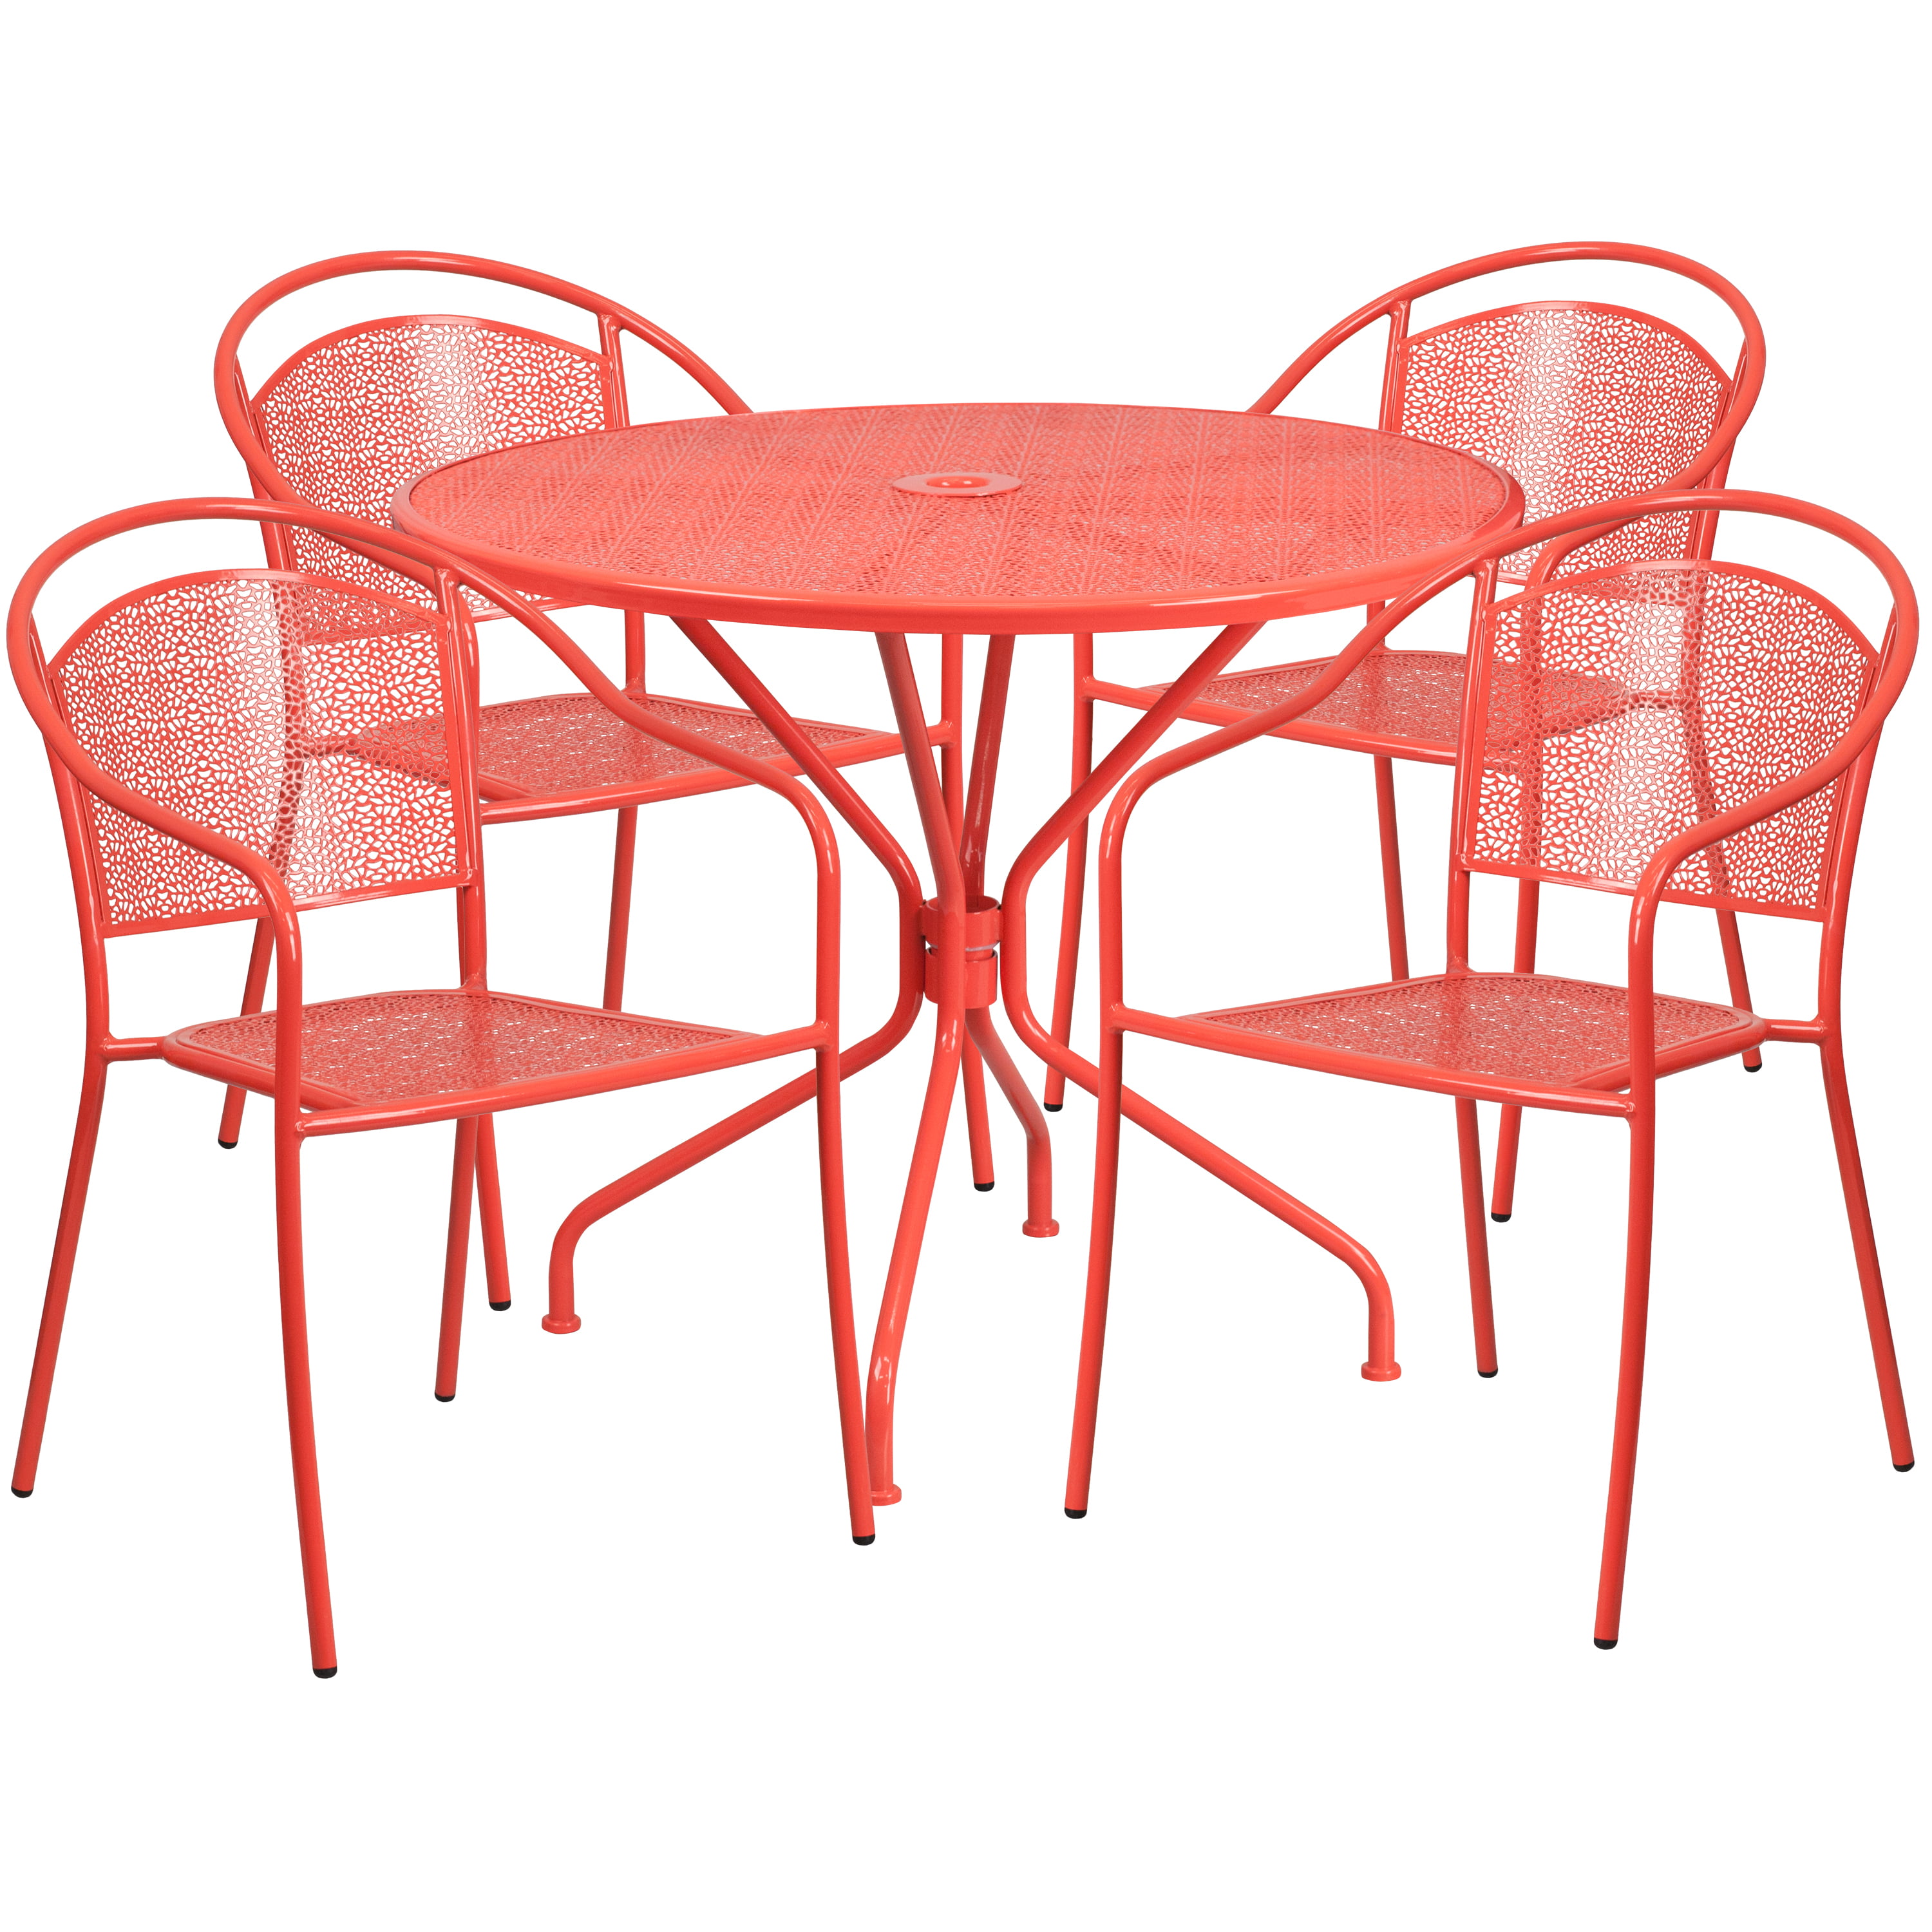 Flash Furniture Commercial Grade 35.25" Round Coral Indoor-Outdoor Steel Patio Table Set with 4 Round Back Chairs - image 2 of 5